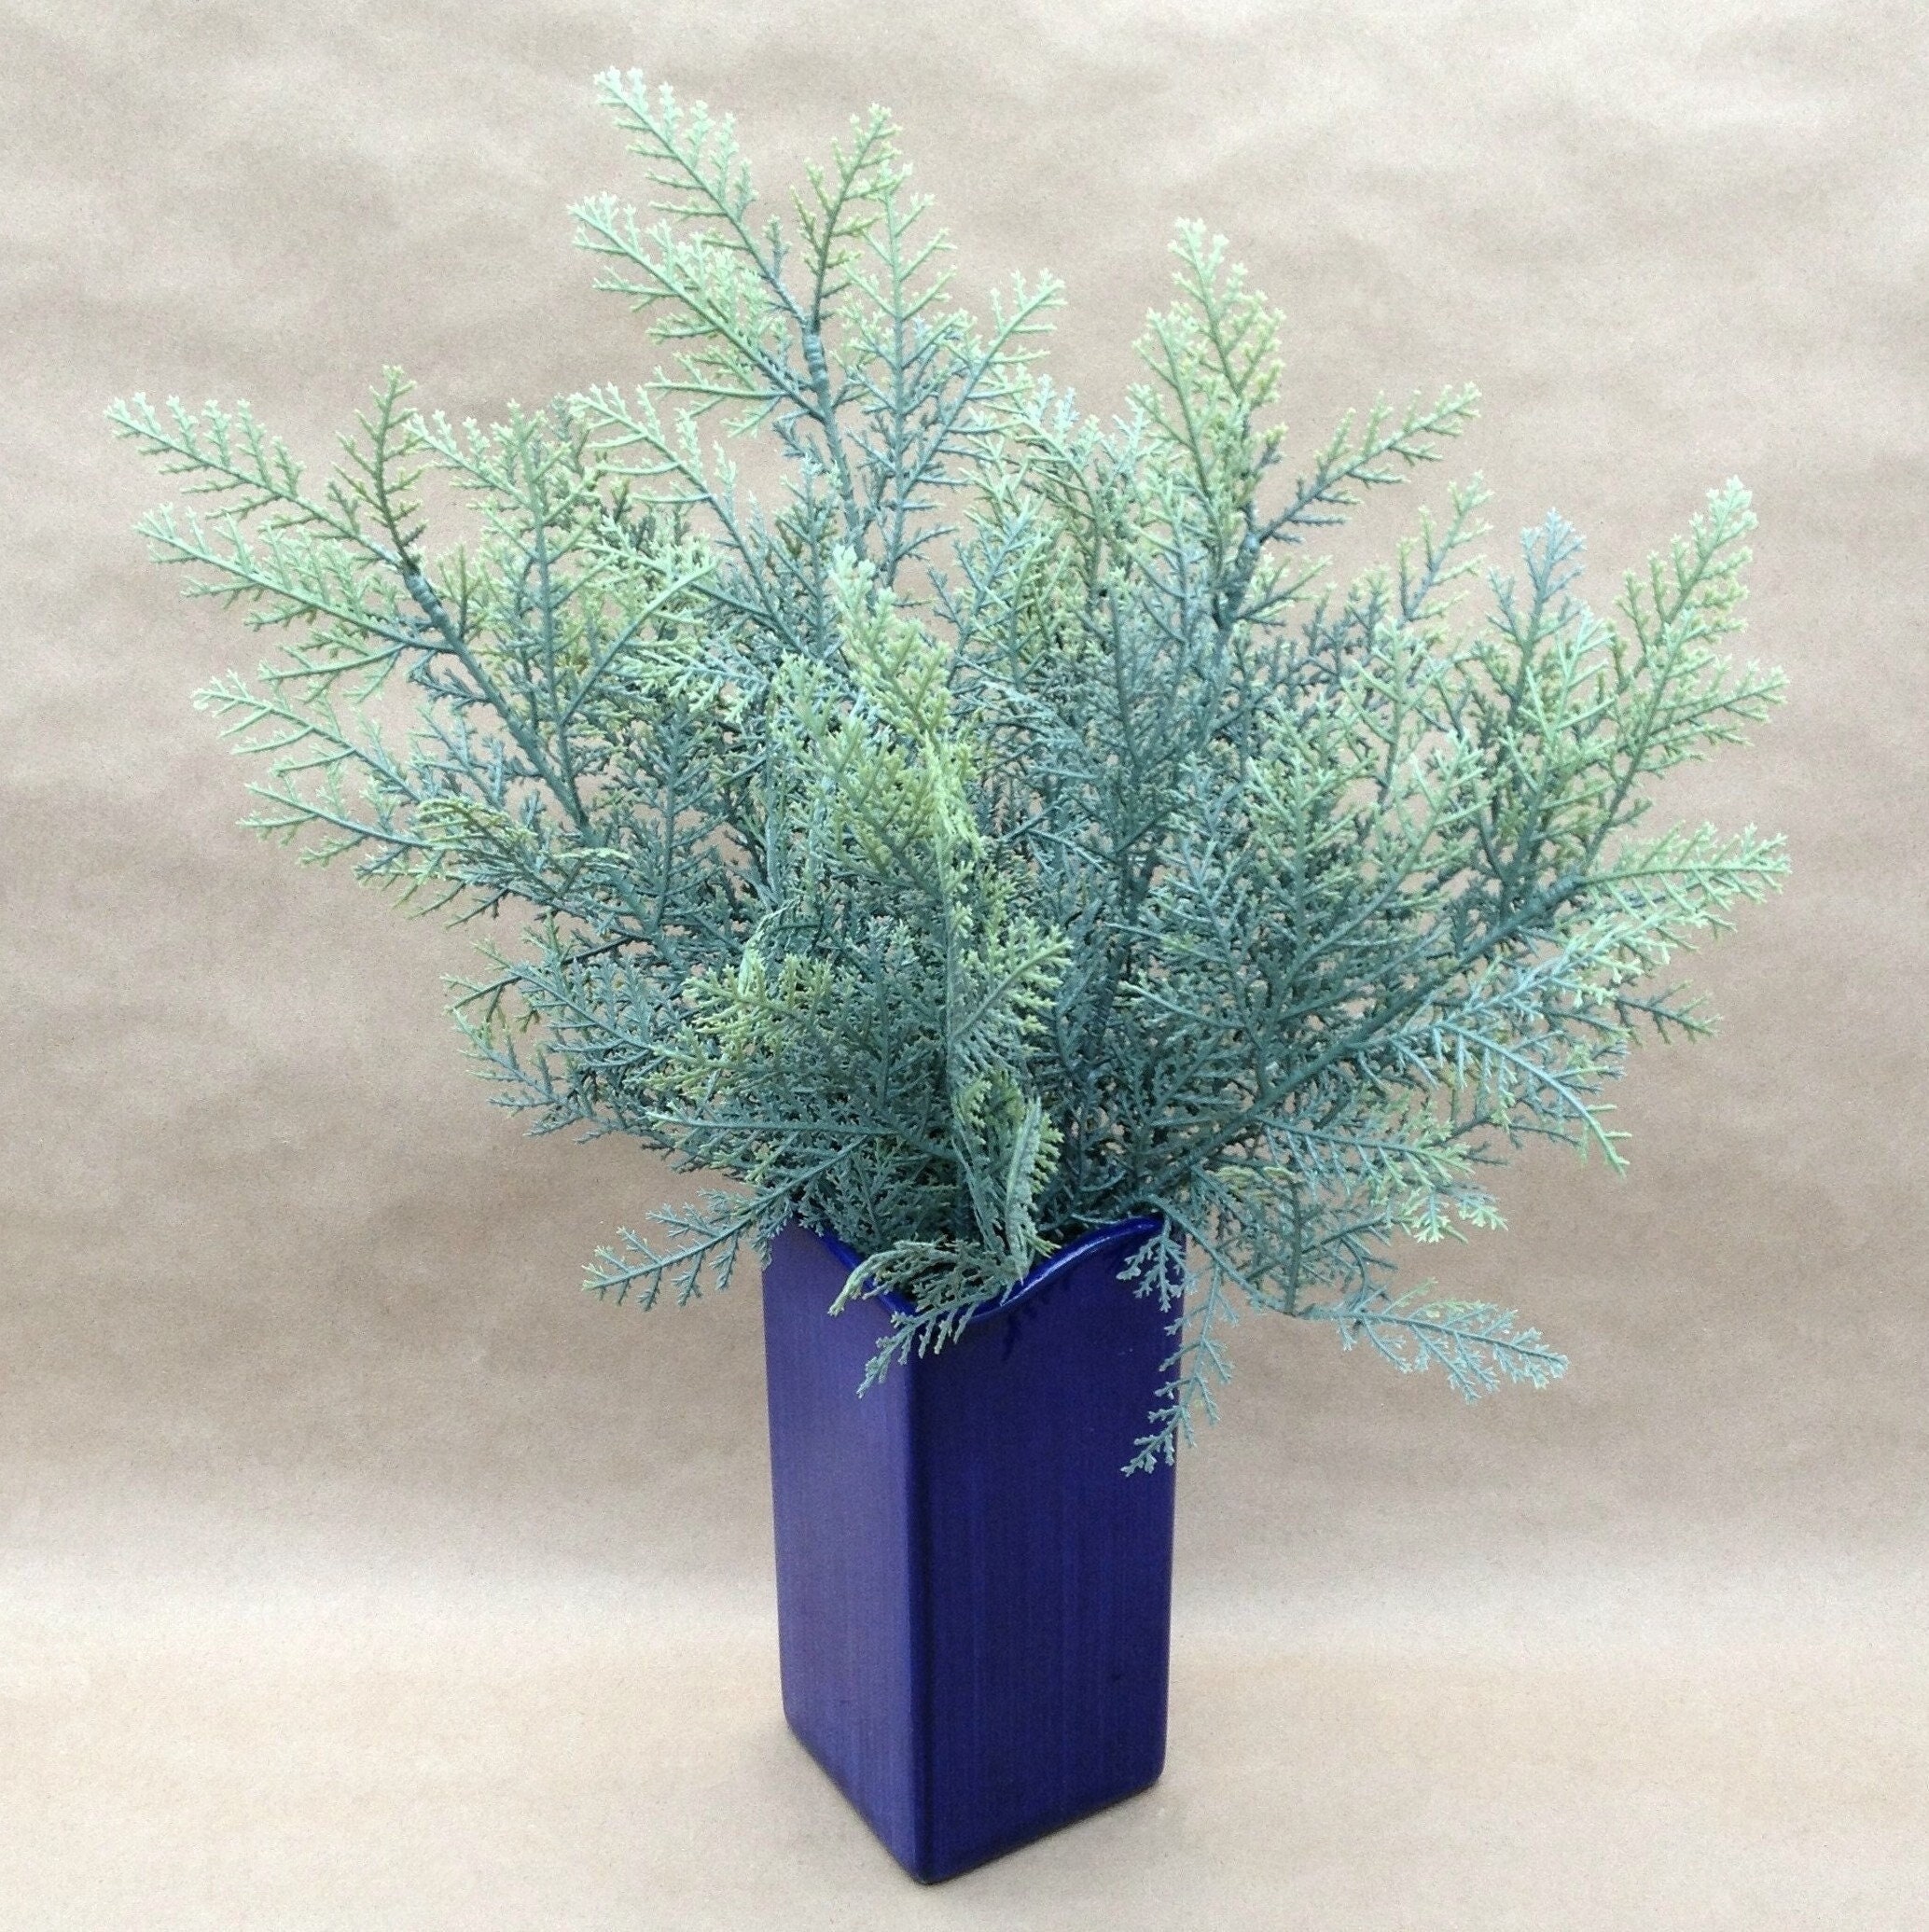 2 Frosted Green 15 in Artificial Sagebrush Leaves Faux Greenery Stems